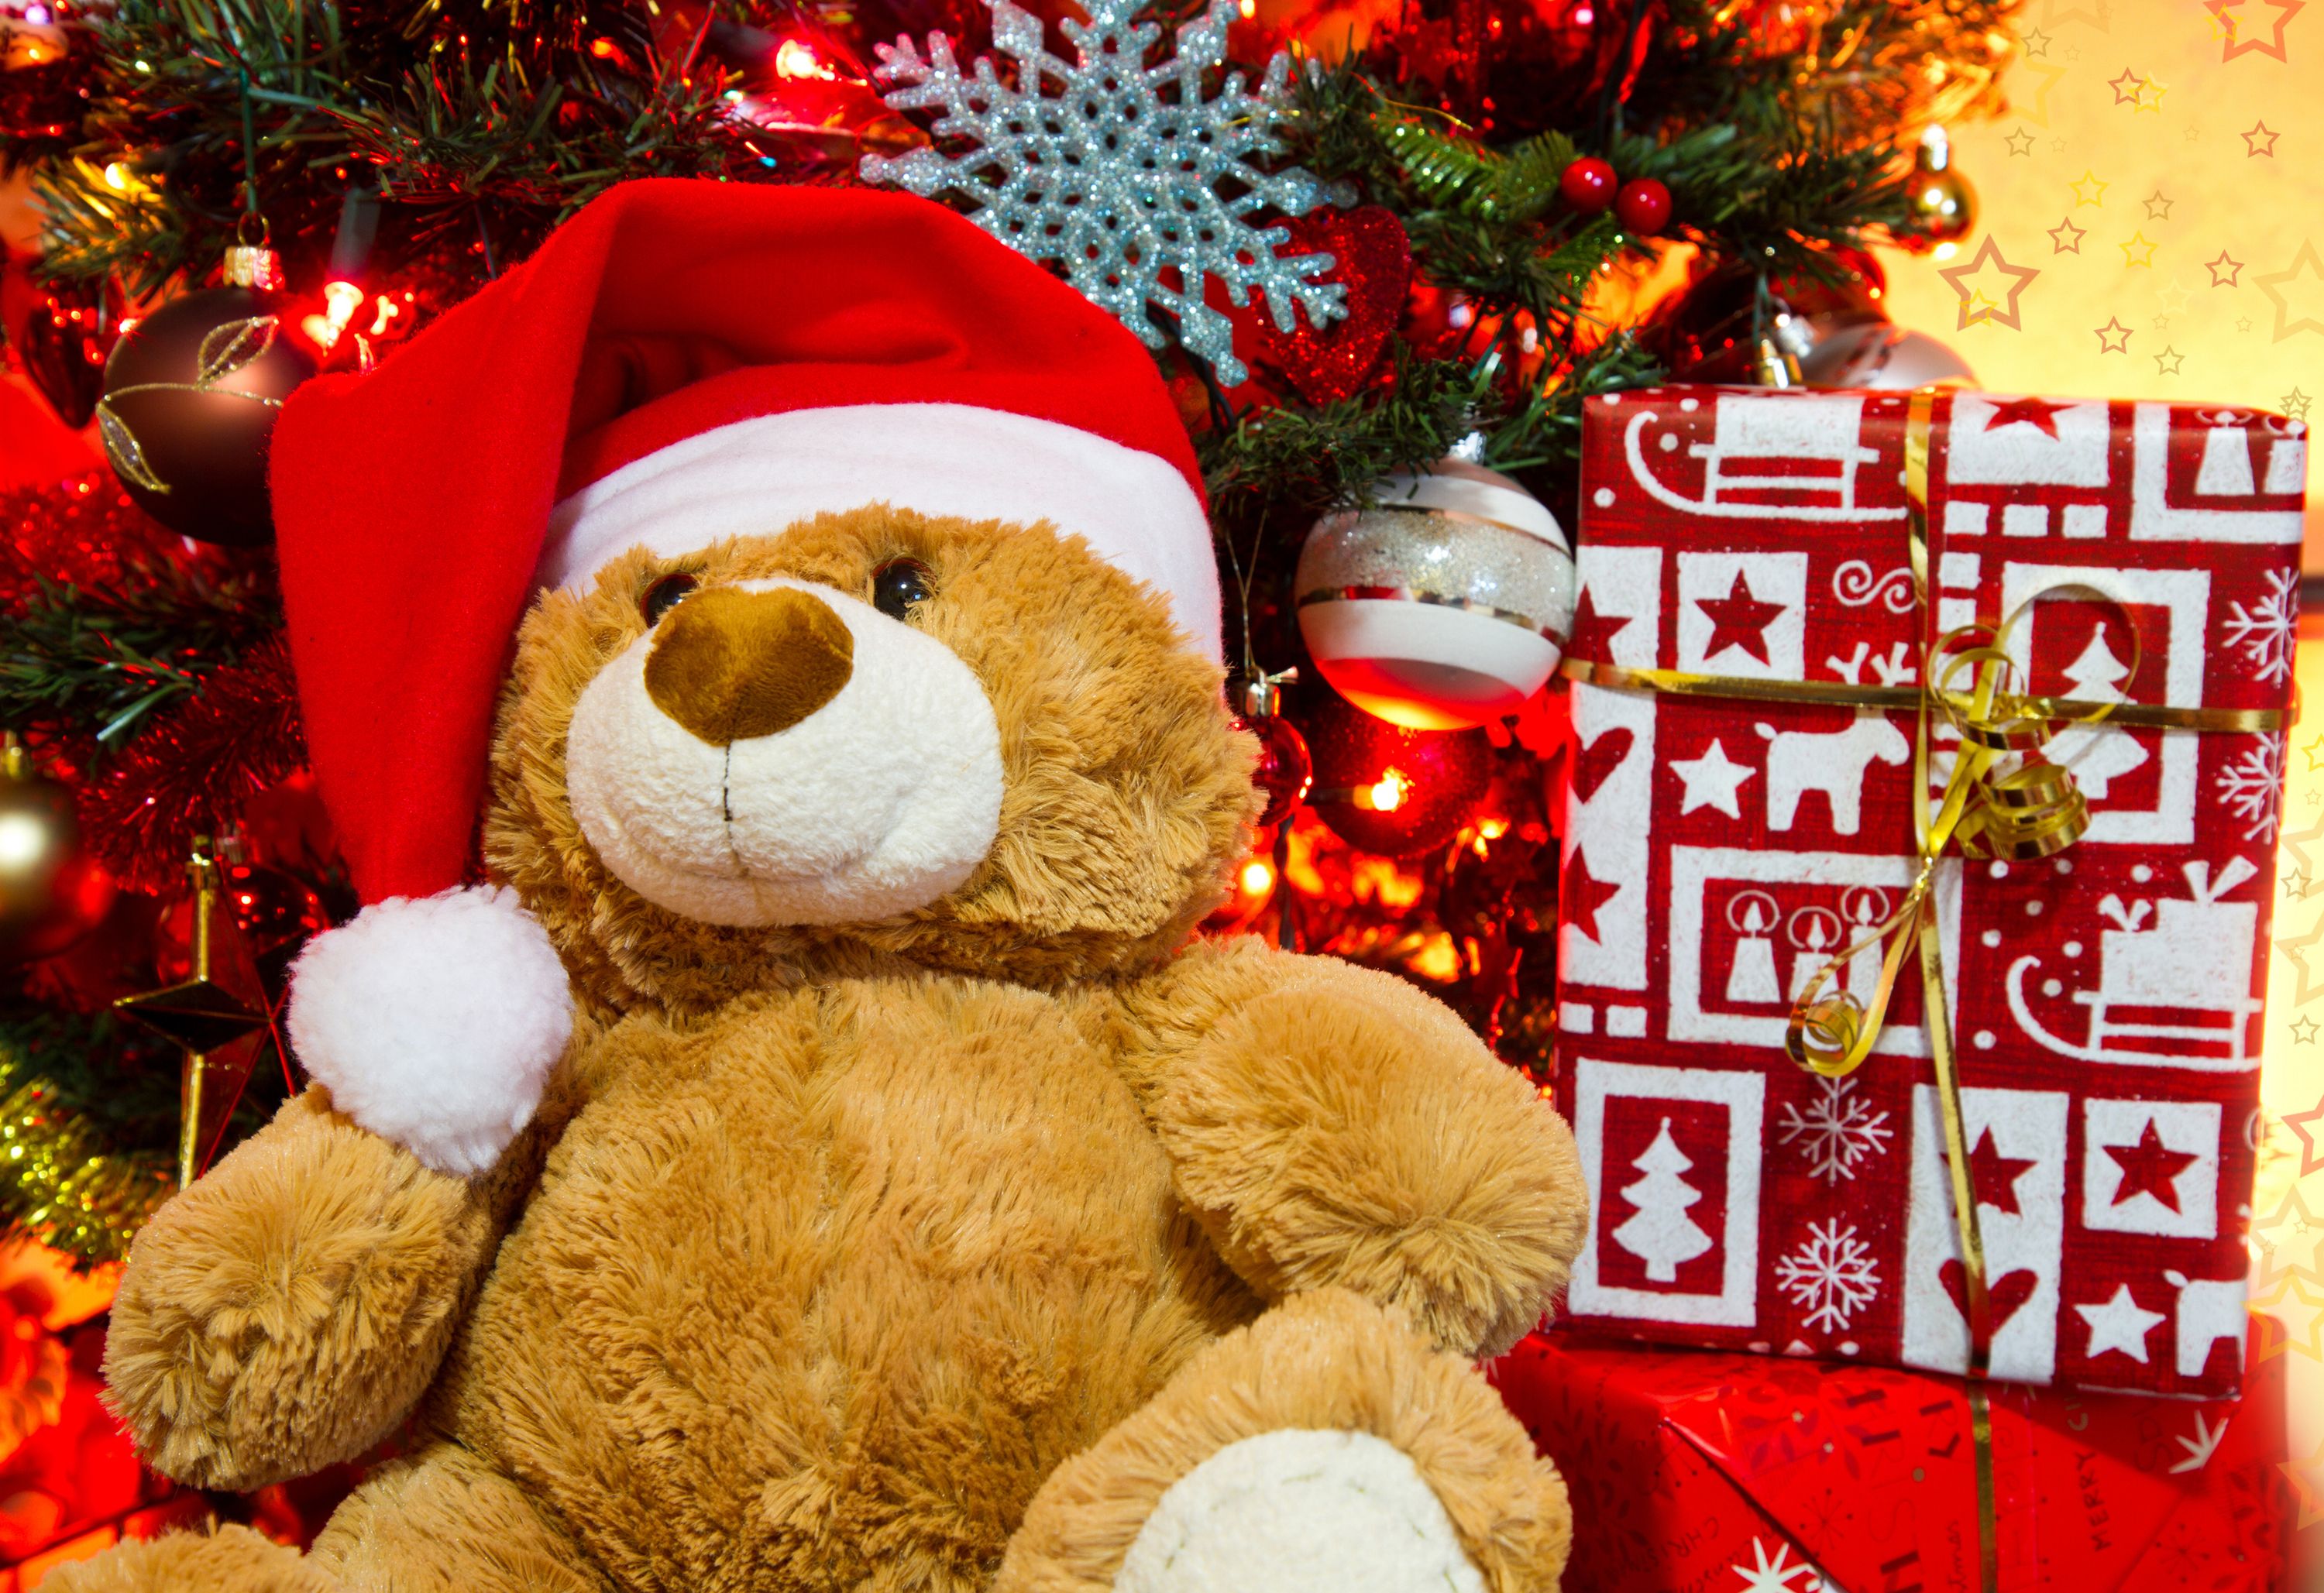 Christmas Teddy bear wallpaper and image, picture, photo